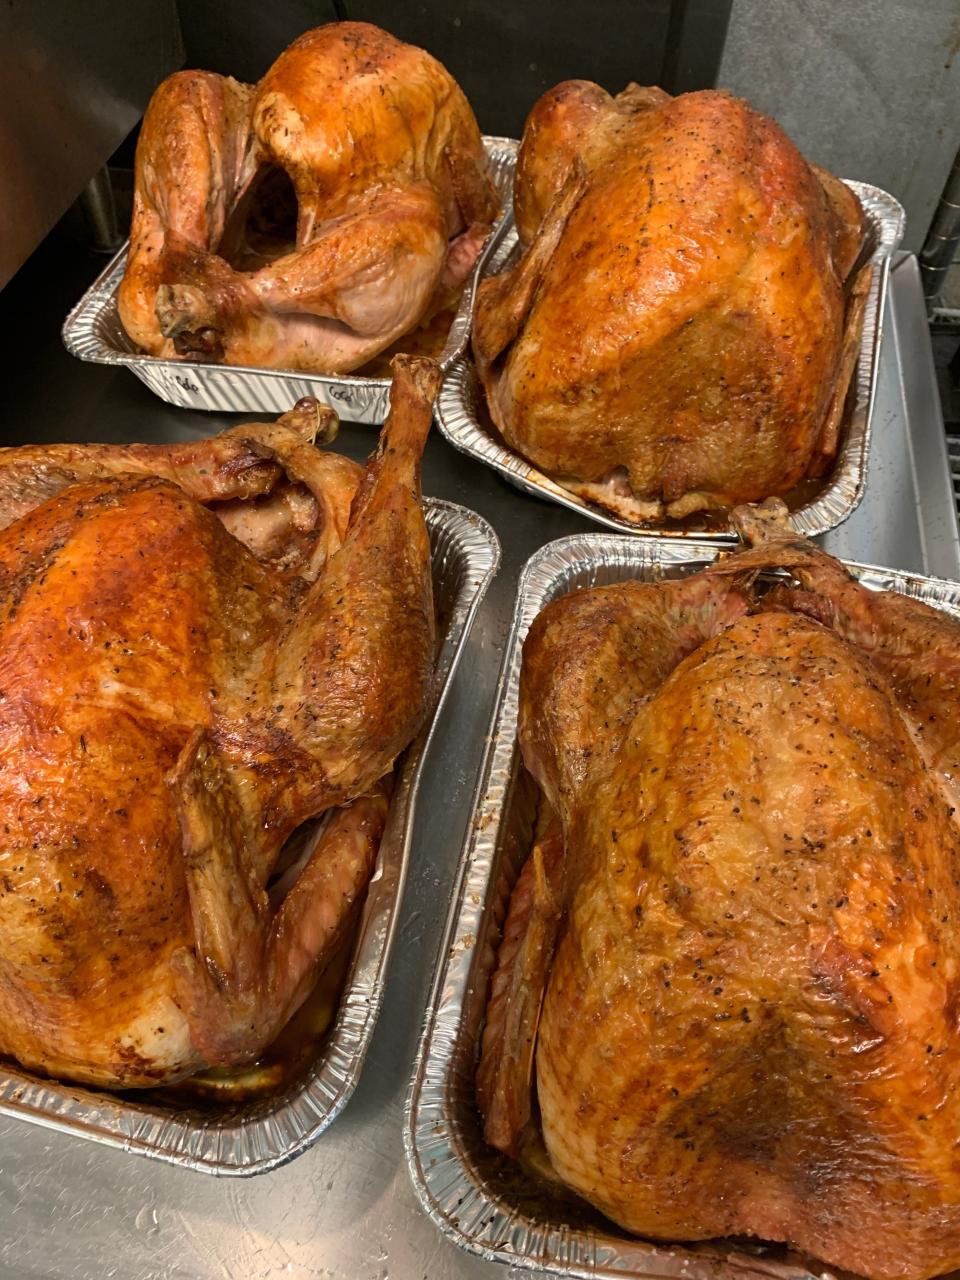 Pine Valley Market in Wilmington offers fully-cooking turkeys, and sides, for Thanksgiving meals.